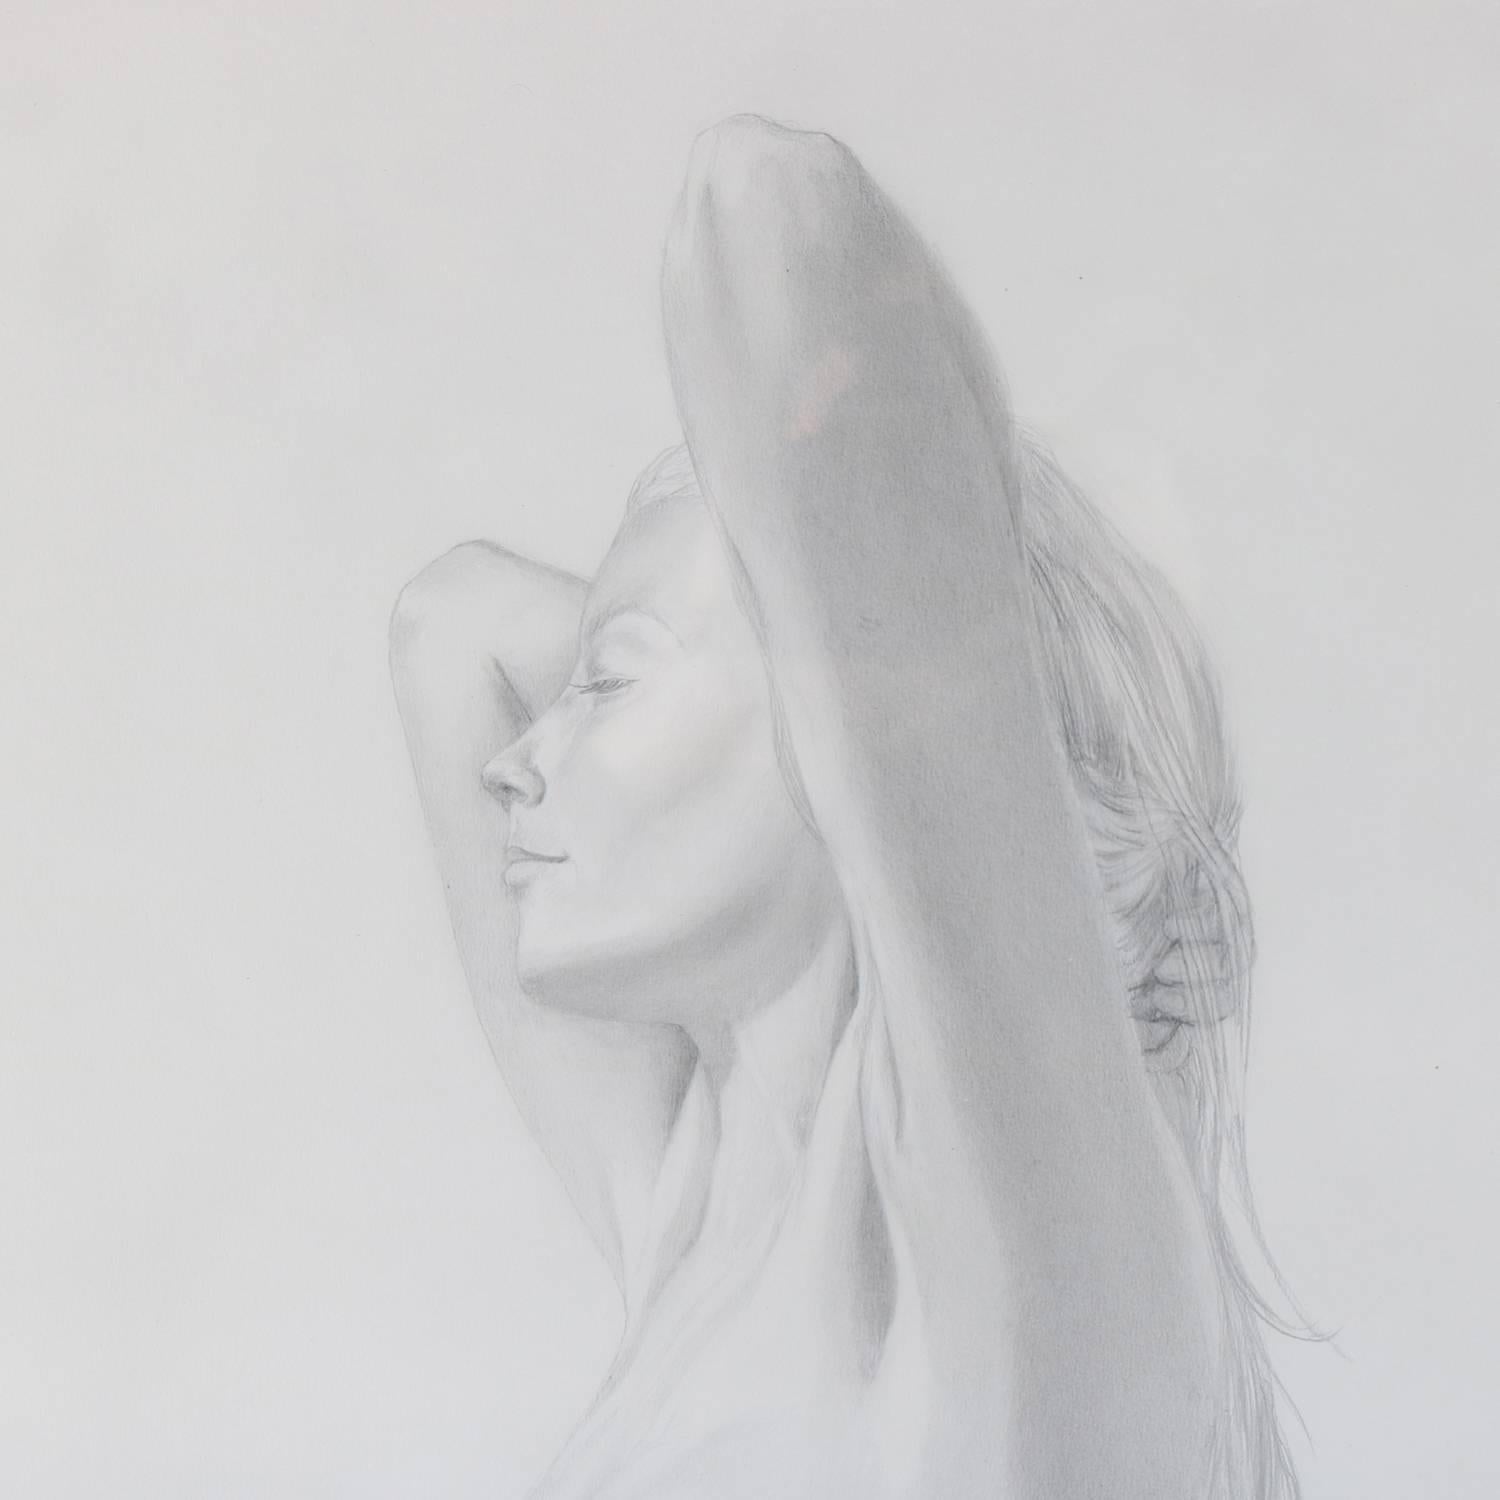 Monumental Mid-Century Modern graphite drawing by David Hanna (United States, 1941-1981) depicts portrait of standing nude female, pencil signed lower right David Hanna, framed and matted, circa 1970.

***DELIVERY NOTICE – Due to COVID-19 we are